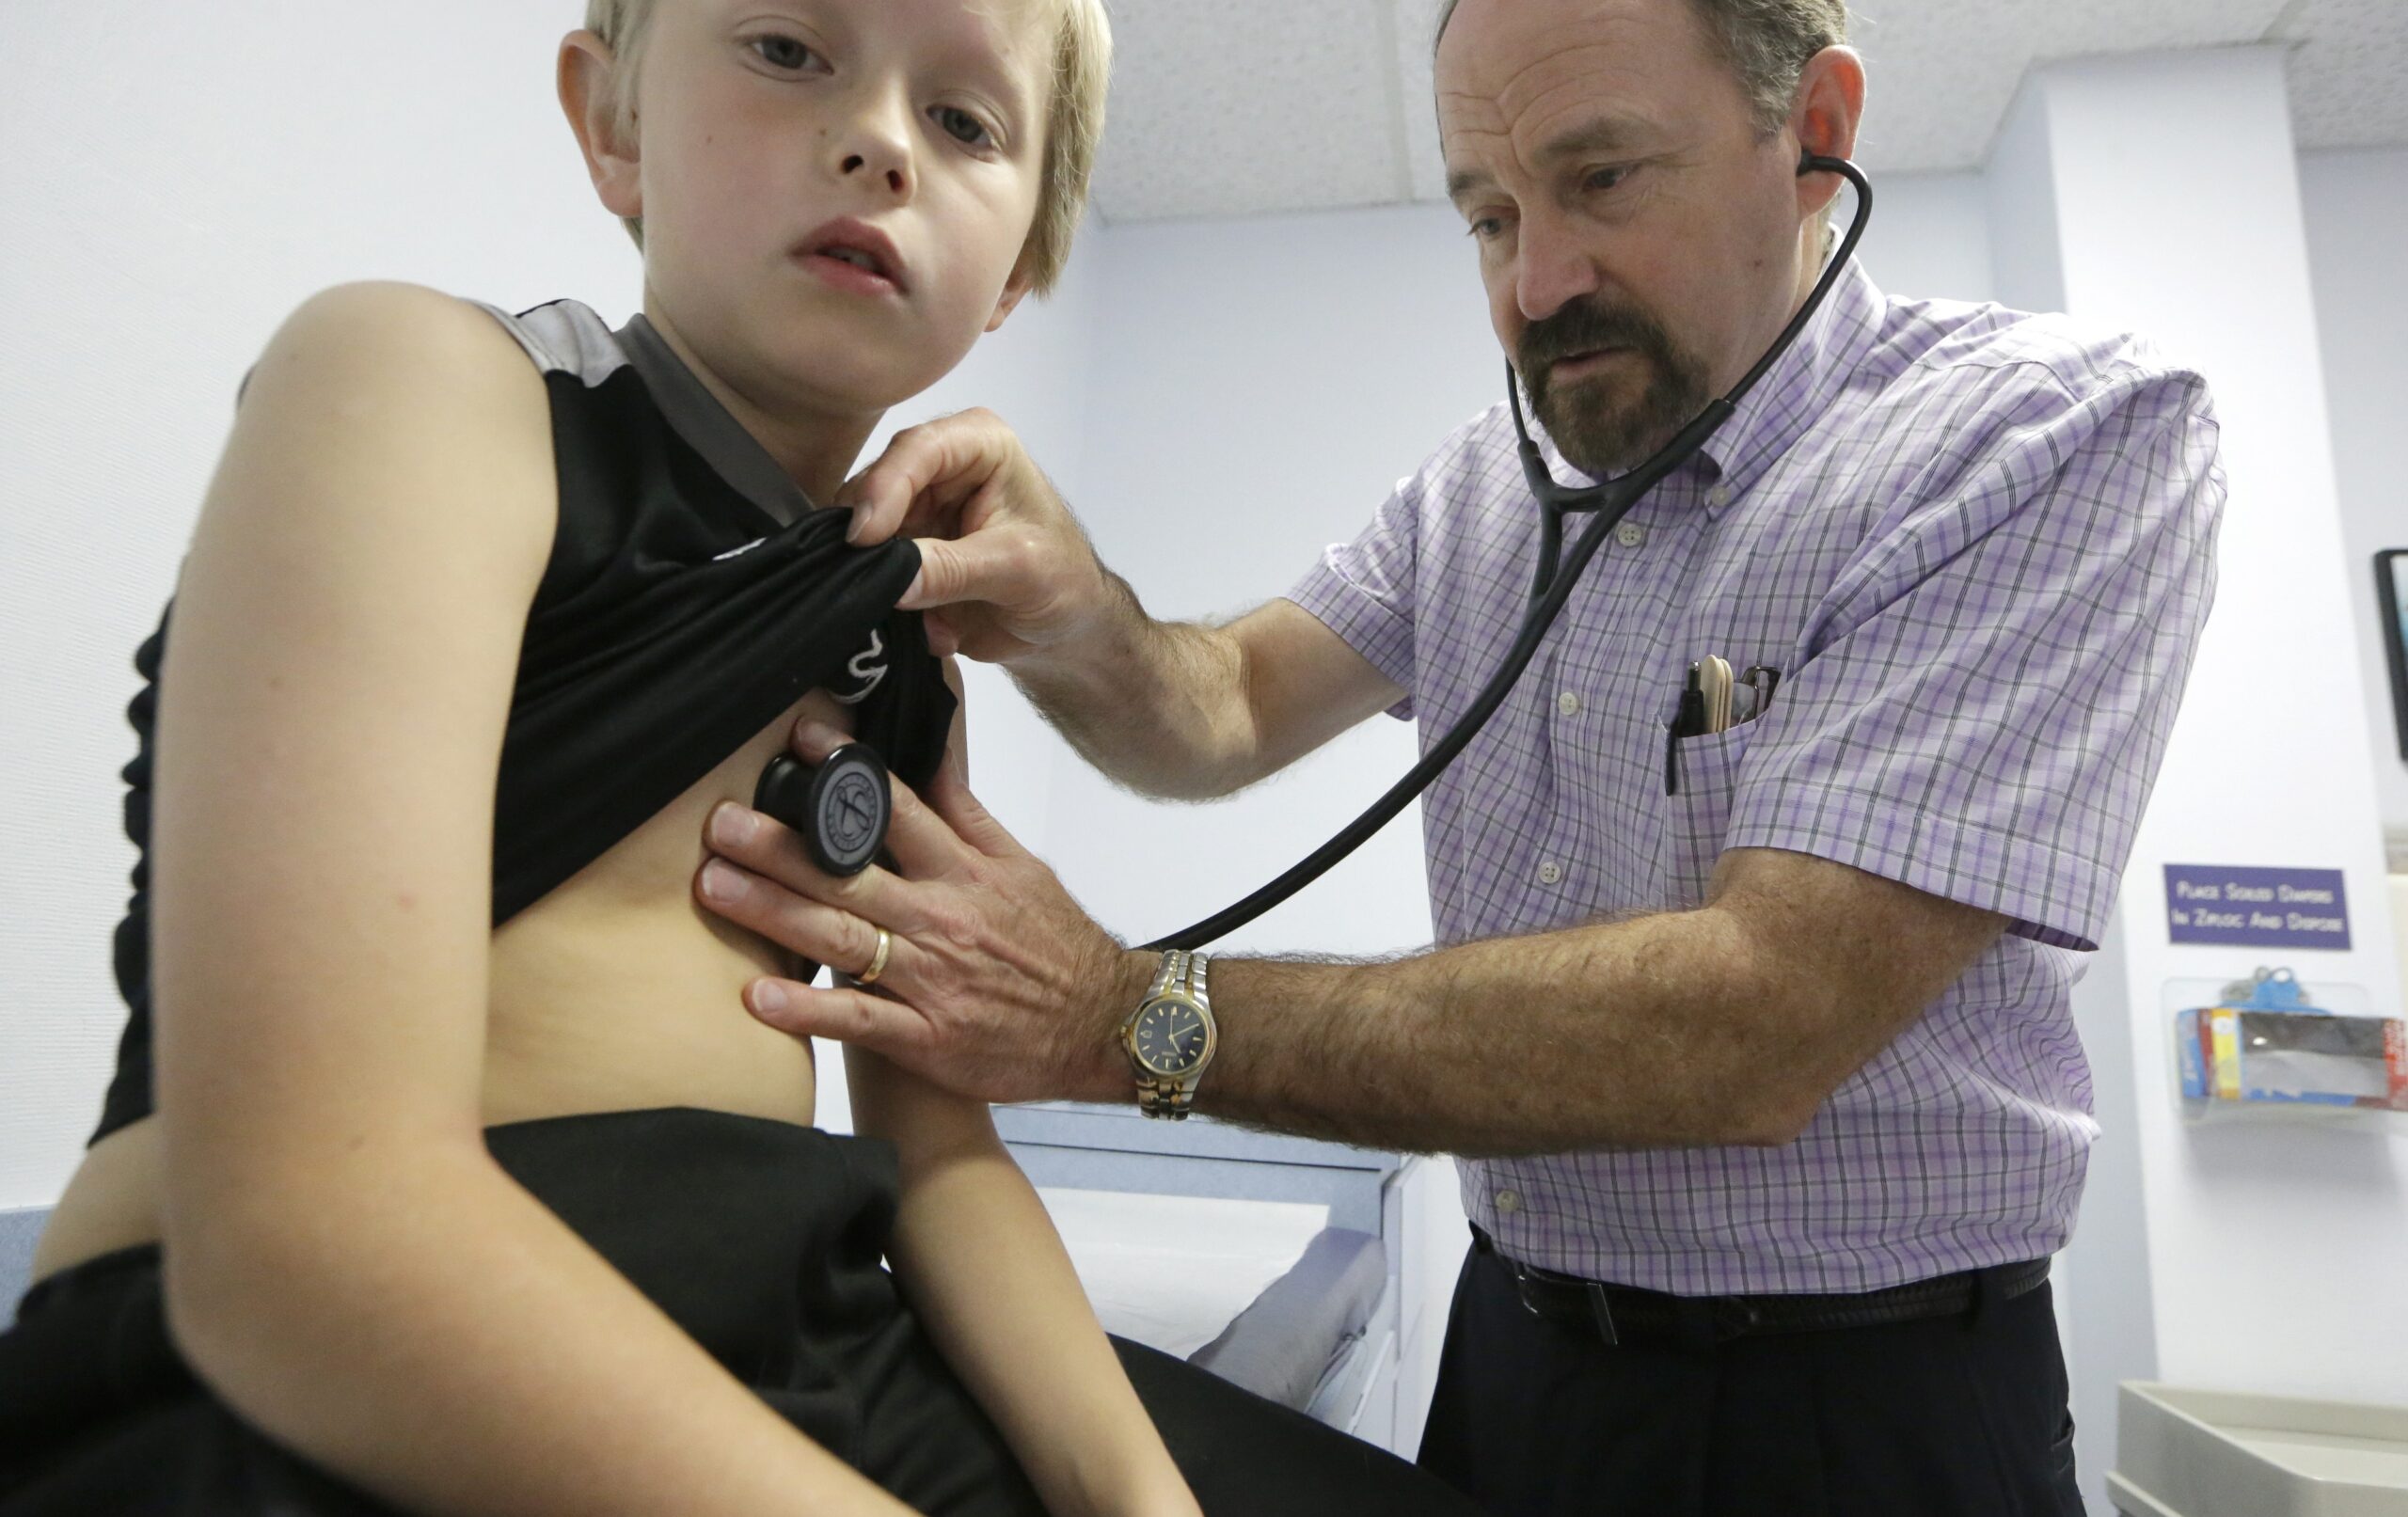 Dr. John Porter examines Connor Russell, 8, during an office visit.